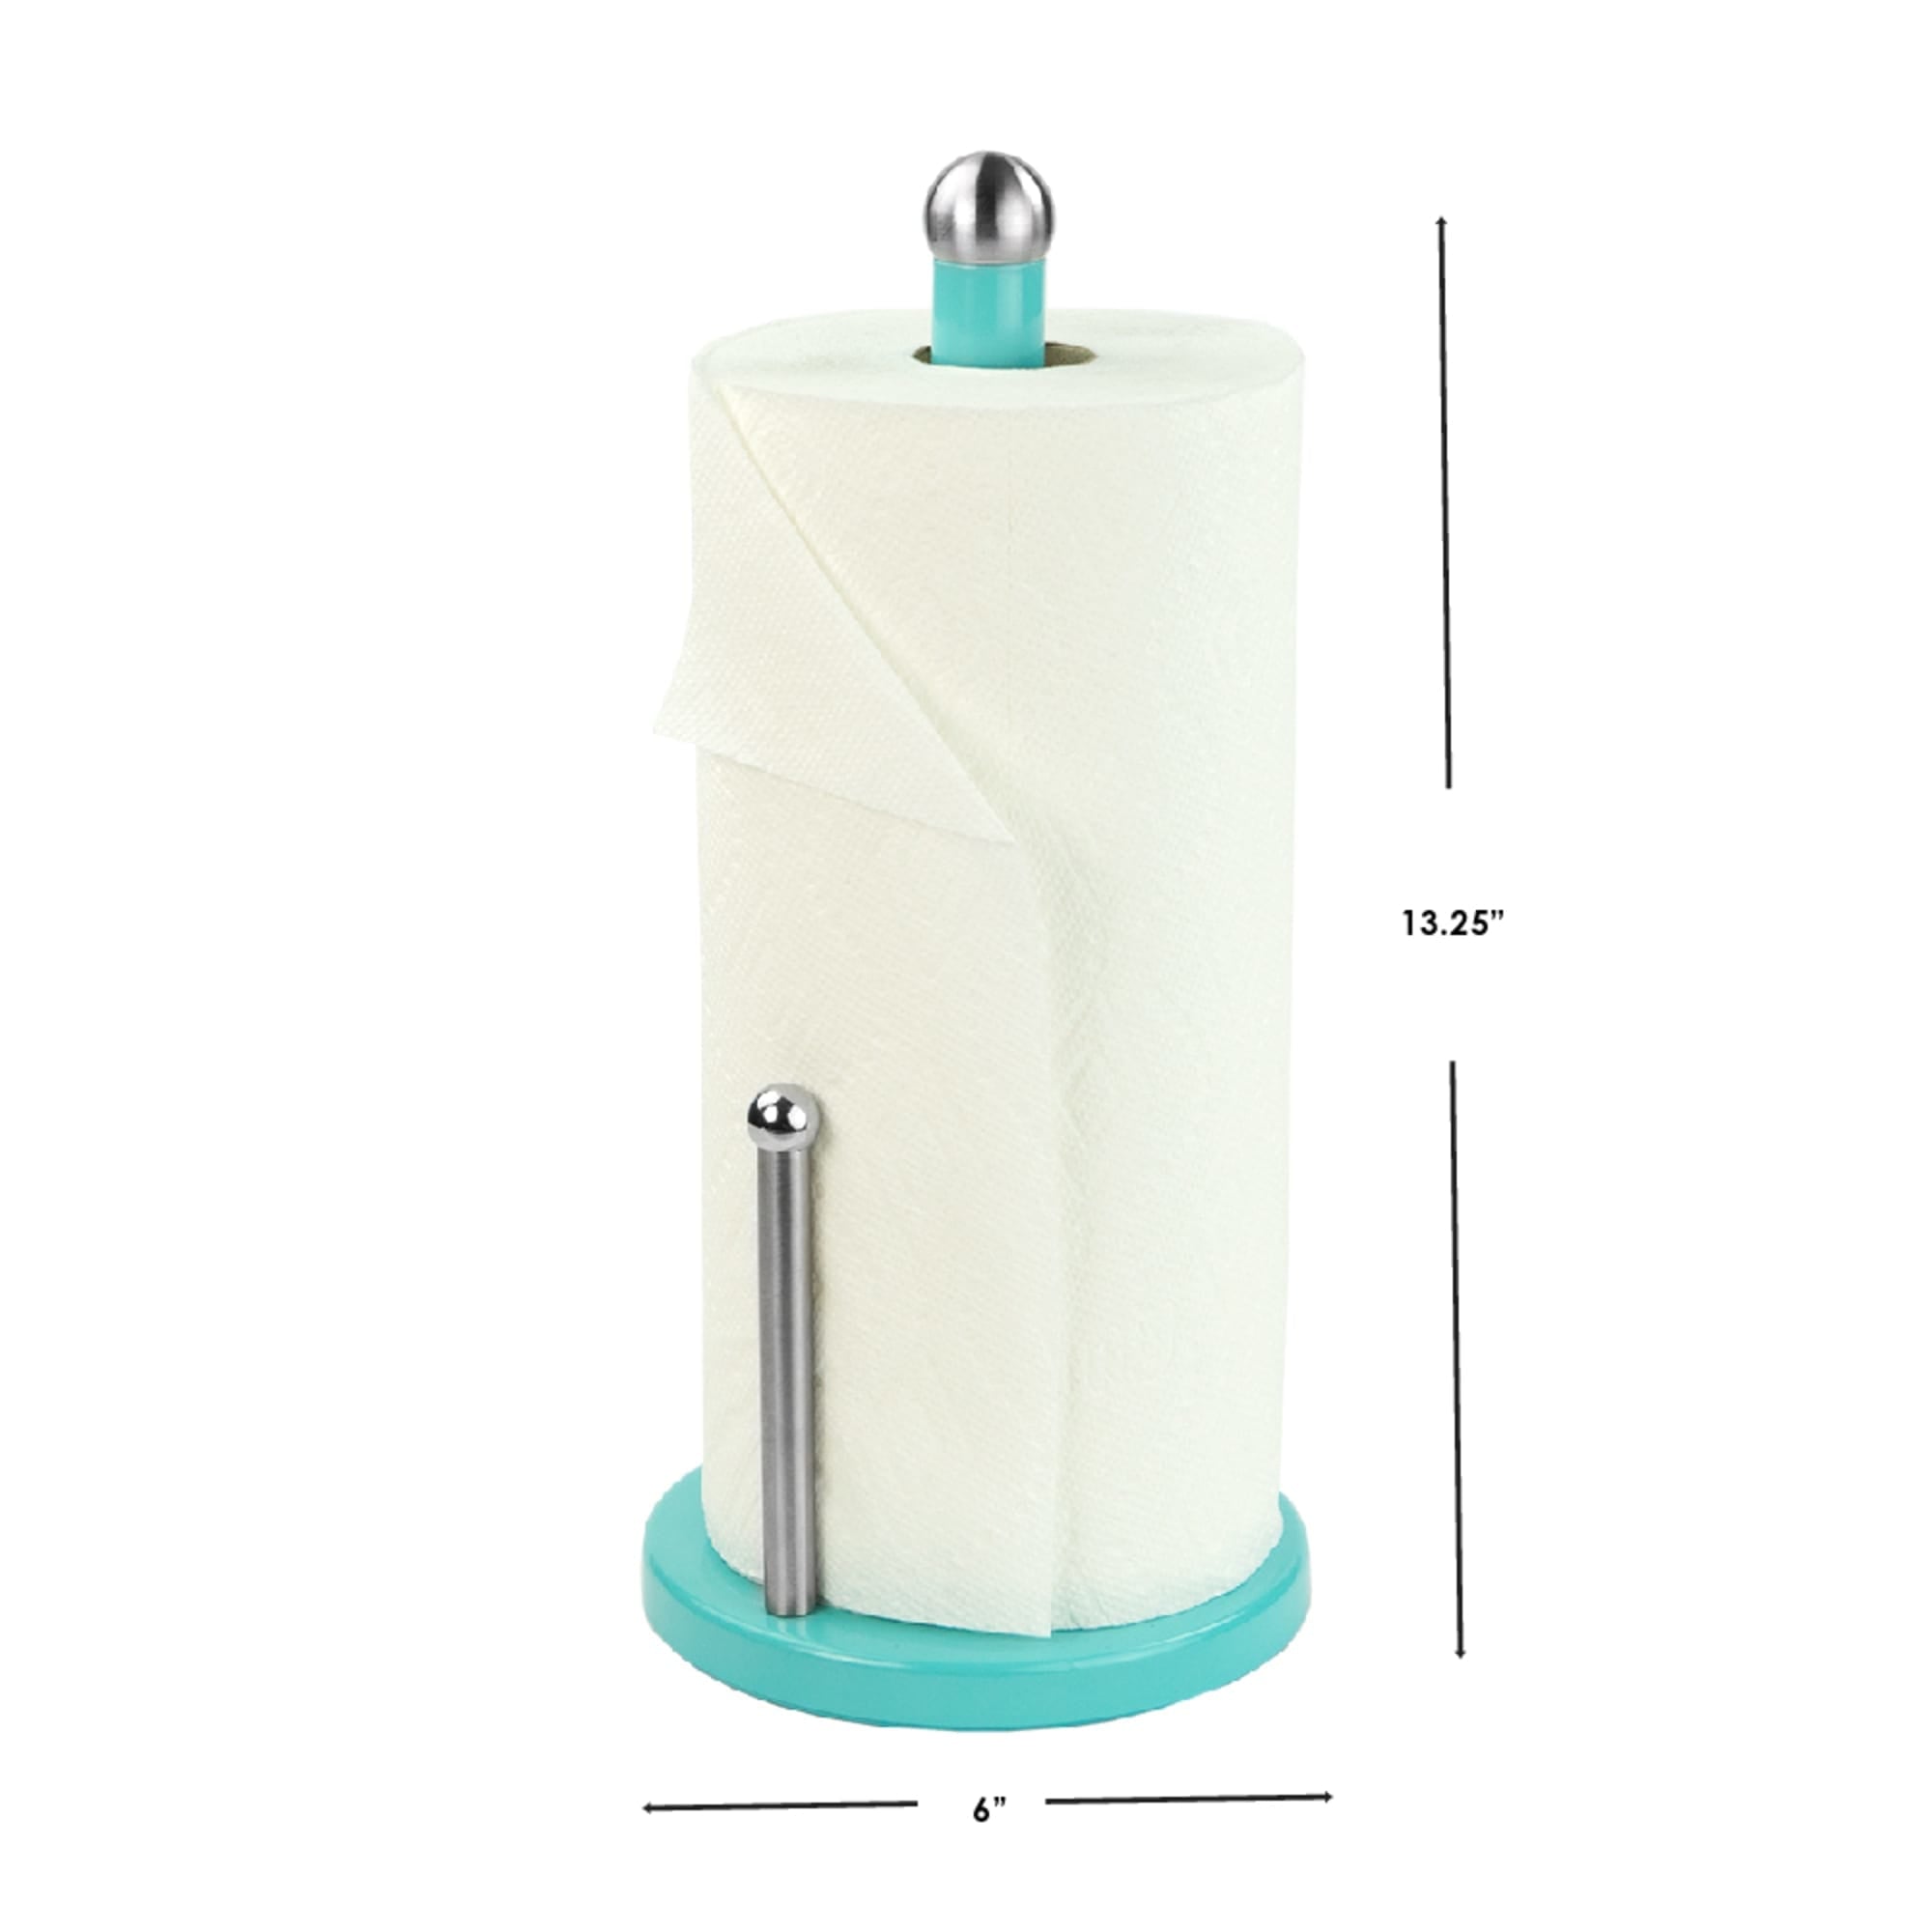 Home Basics Powder Coated Steel Paper Towel Holder, Turquoise $5.00 EACH, CASE PACK OF 12